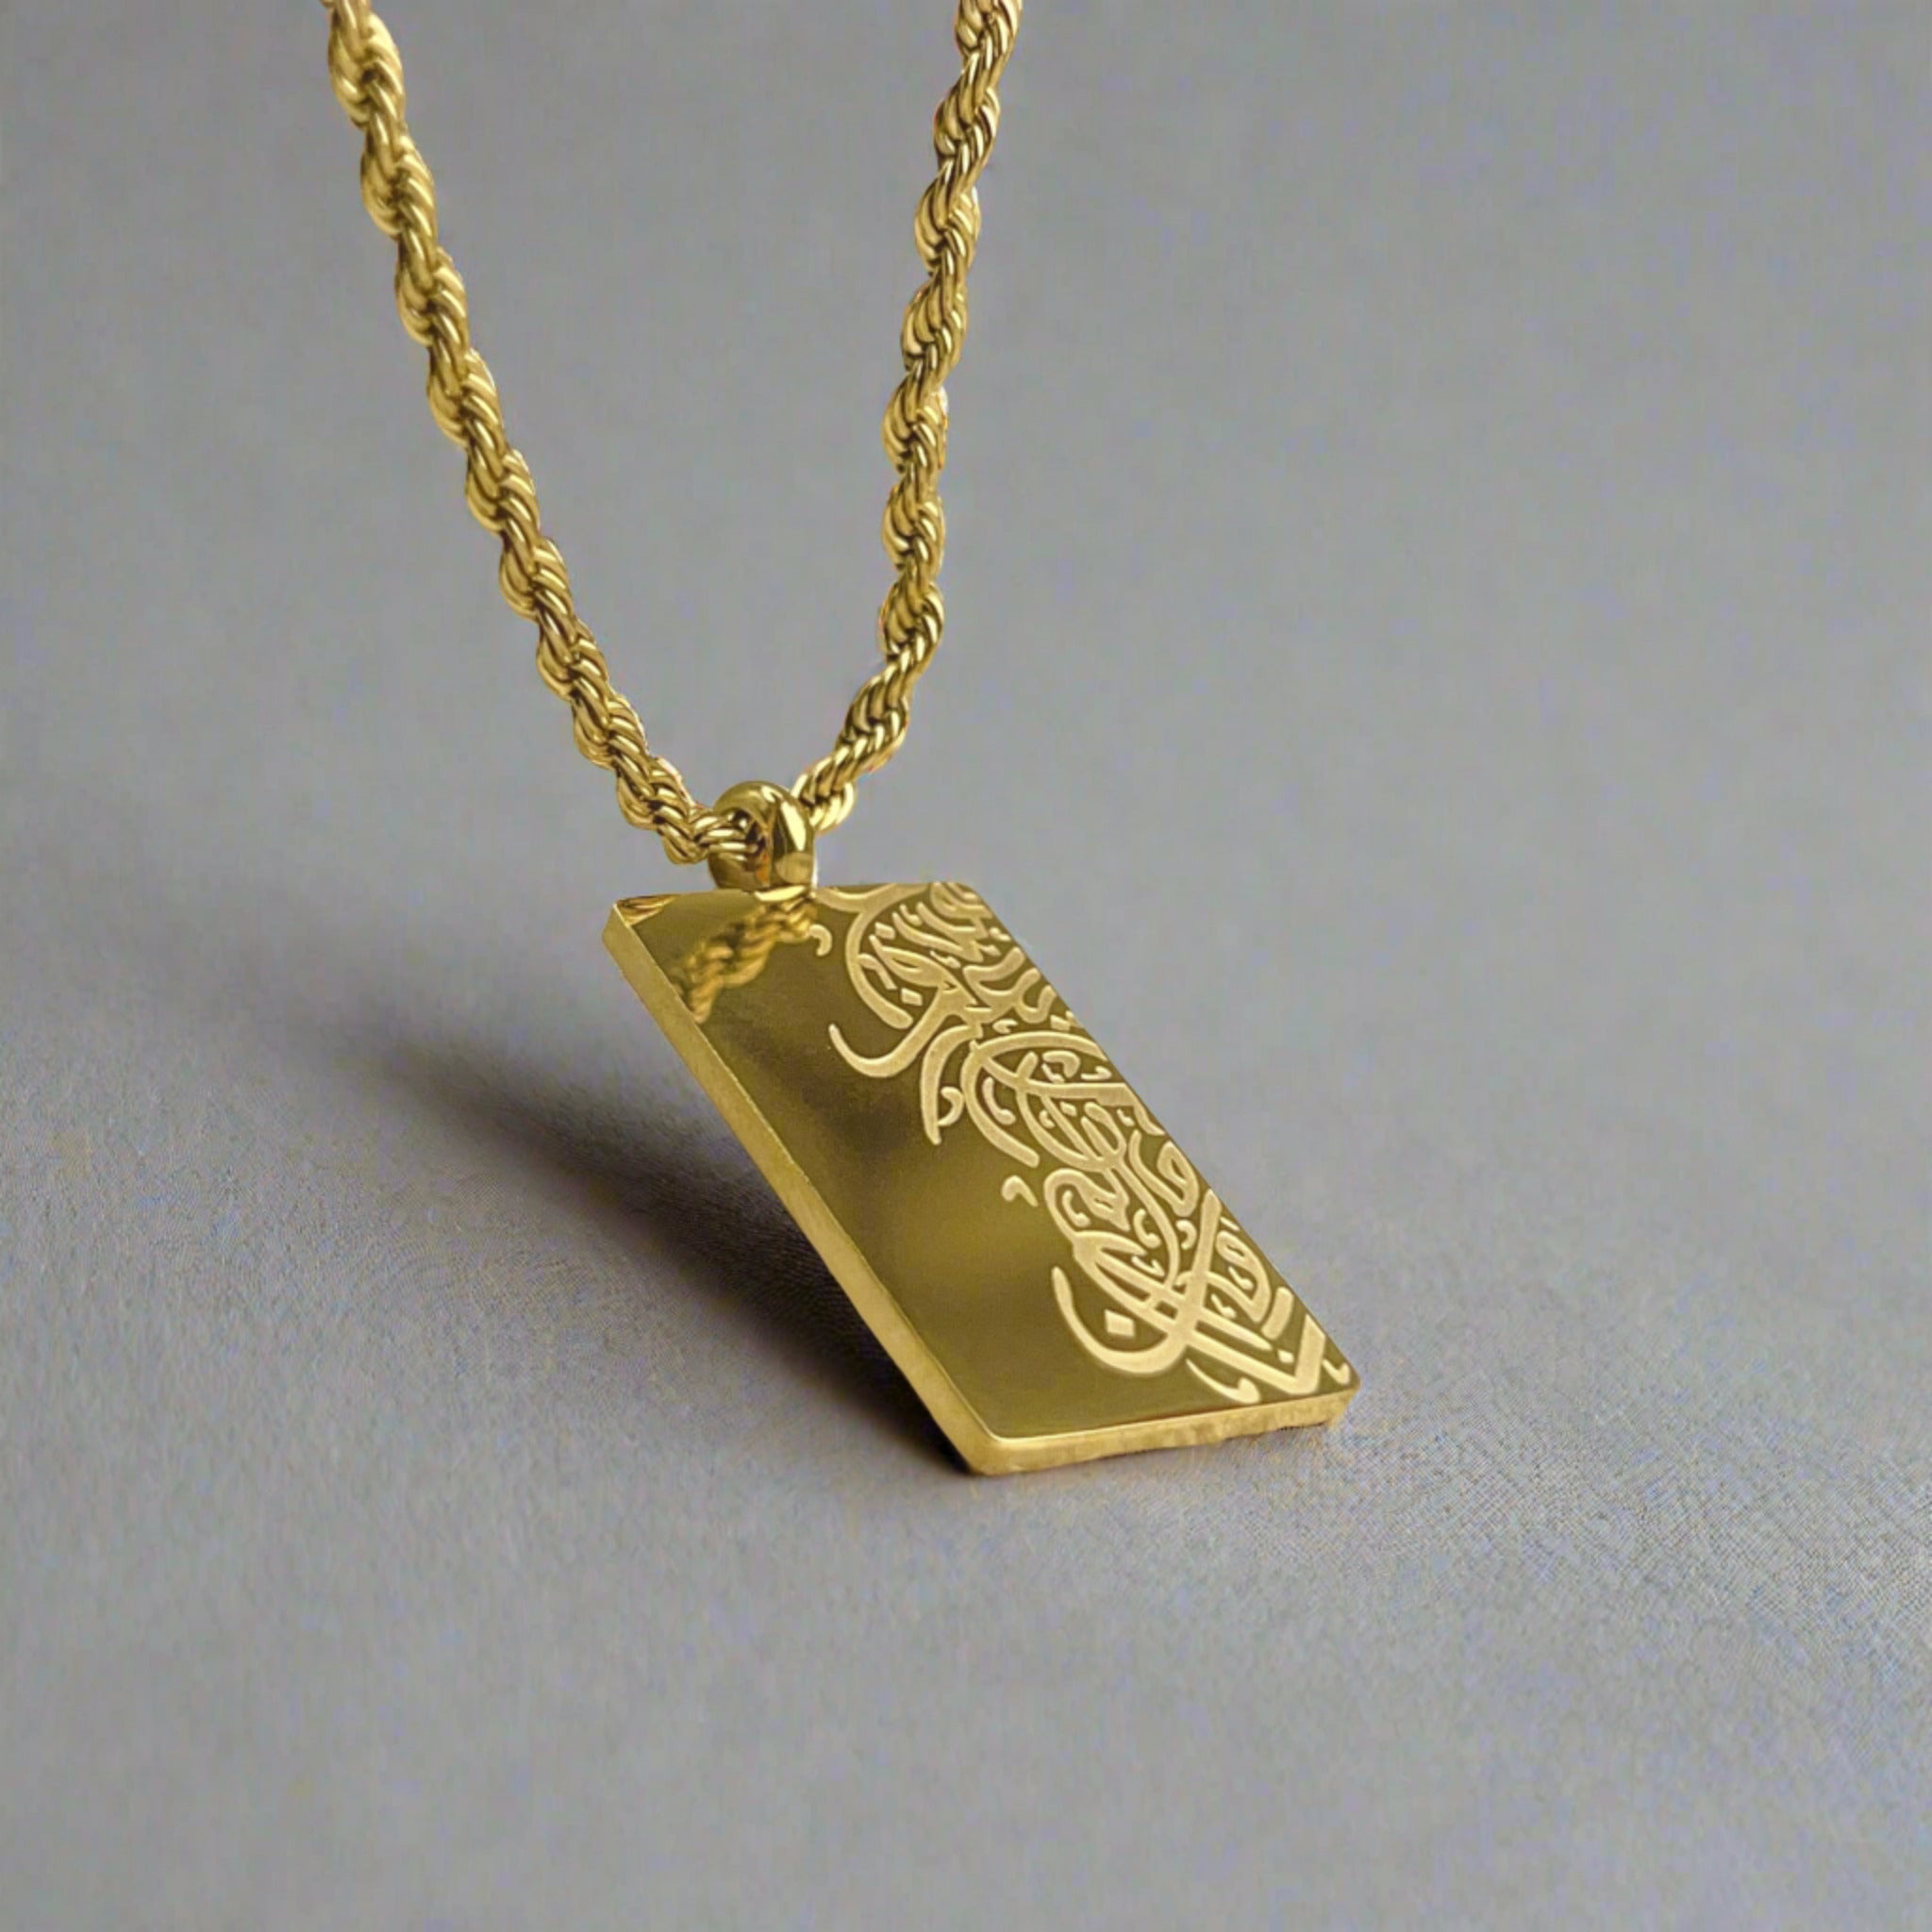 Calligraphy Necklace | Men